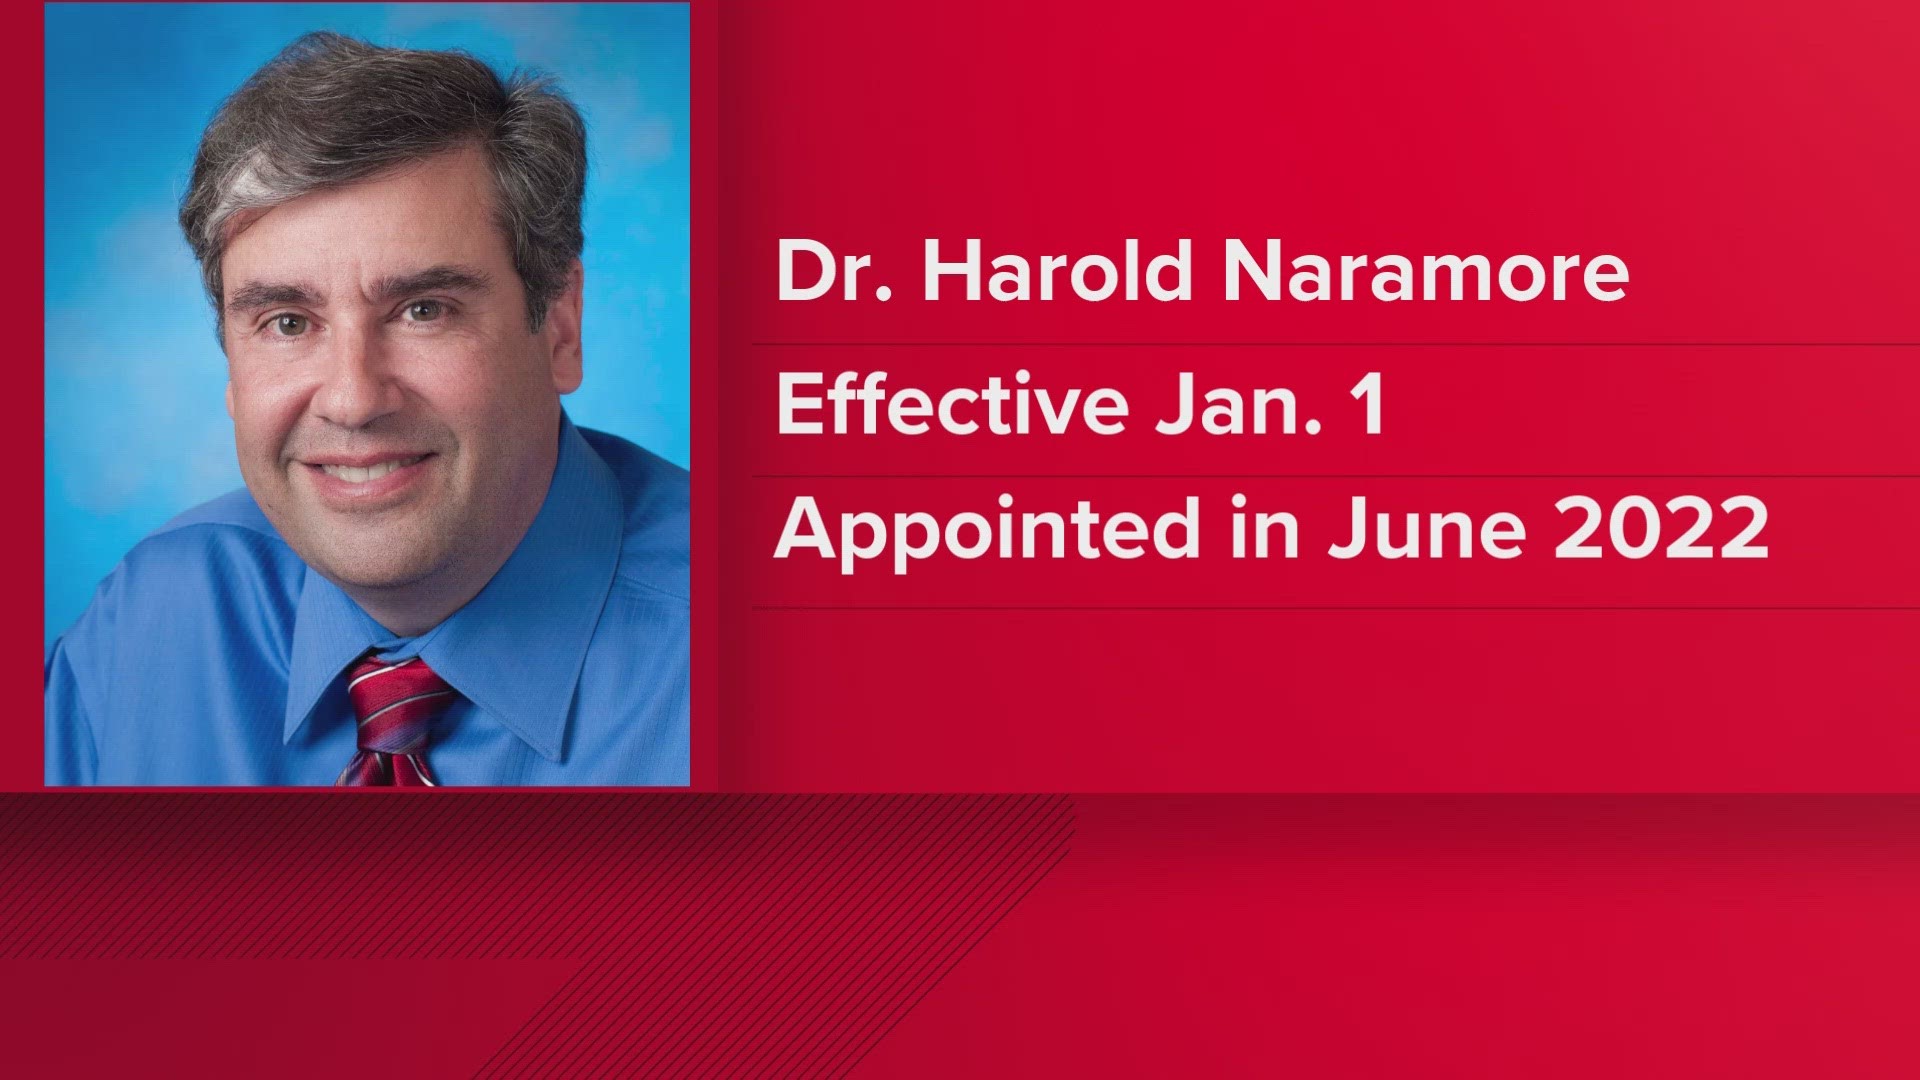 Dr. Harold Naramore started as the hospital's CEO in June 2022 and was involved in a clash with the county commission over ownership of BMH assets and property.